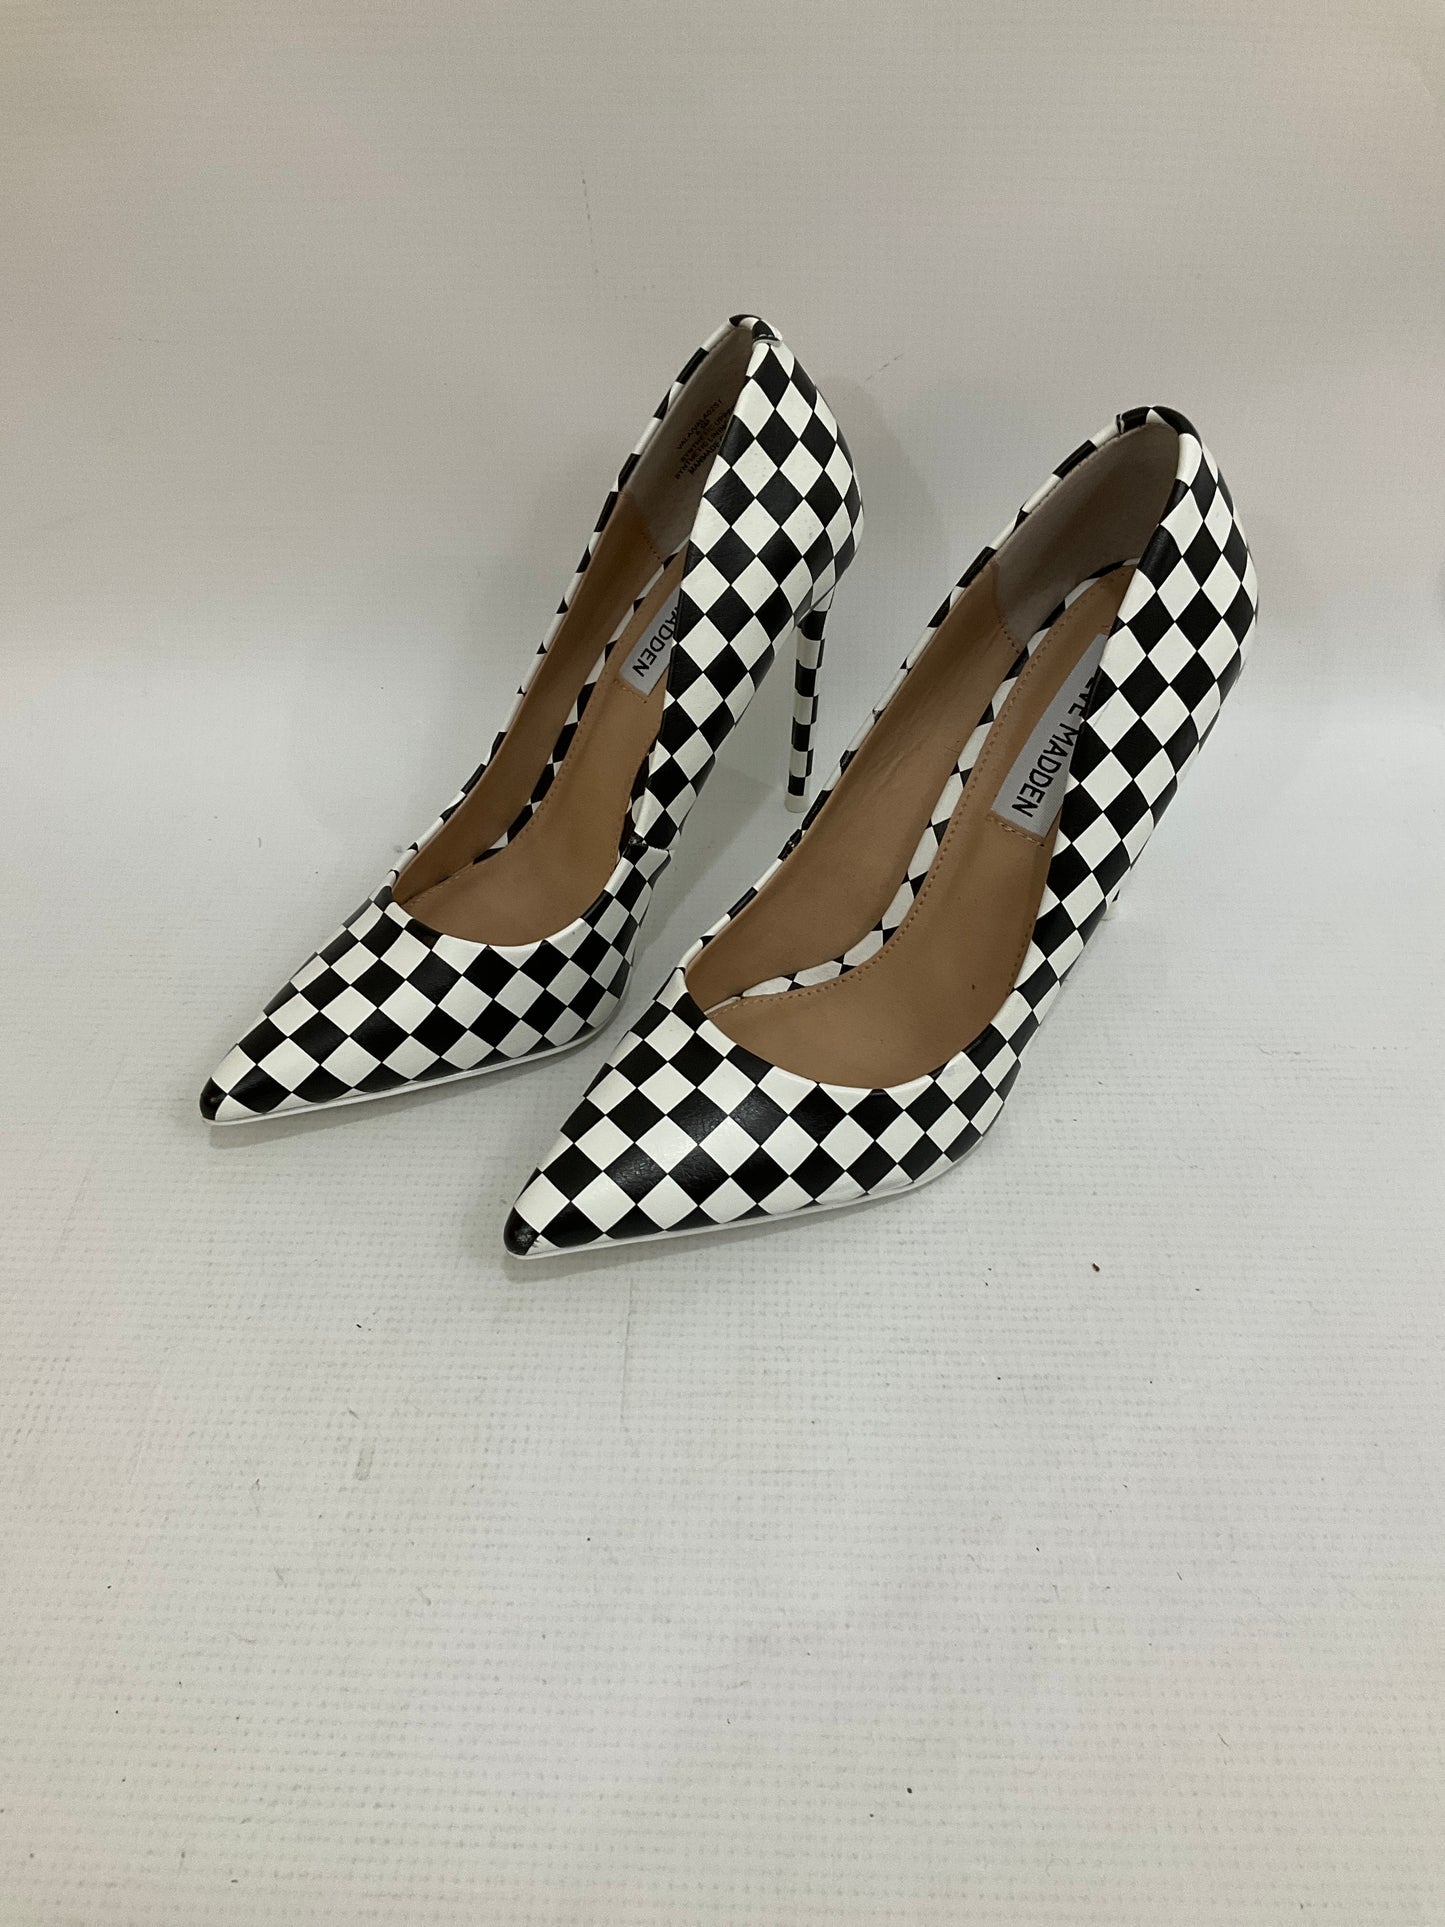 Shoes Heels Stiletto By Steve Madden  Size: 6.5